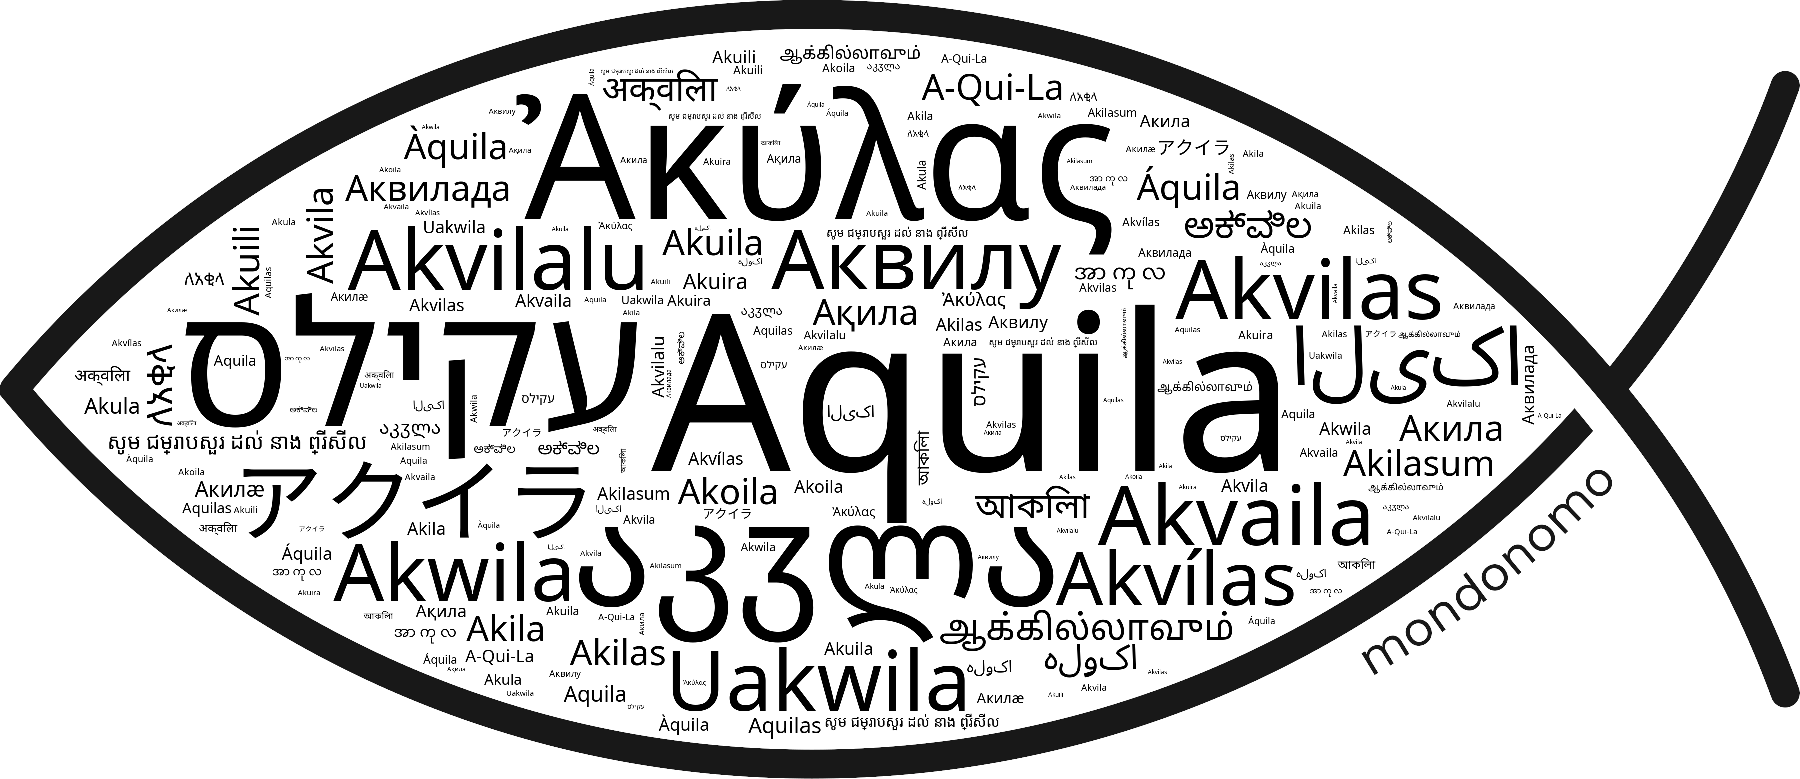 Name Aquila in the world's Bibles